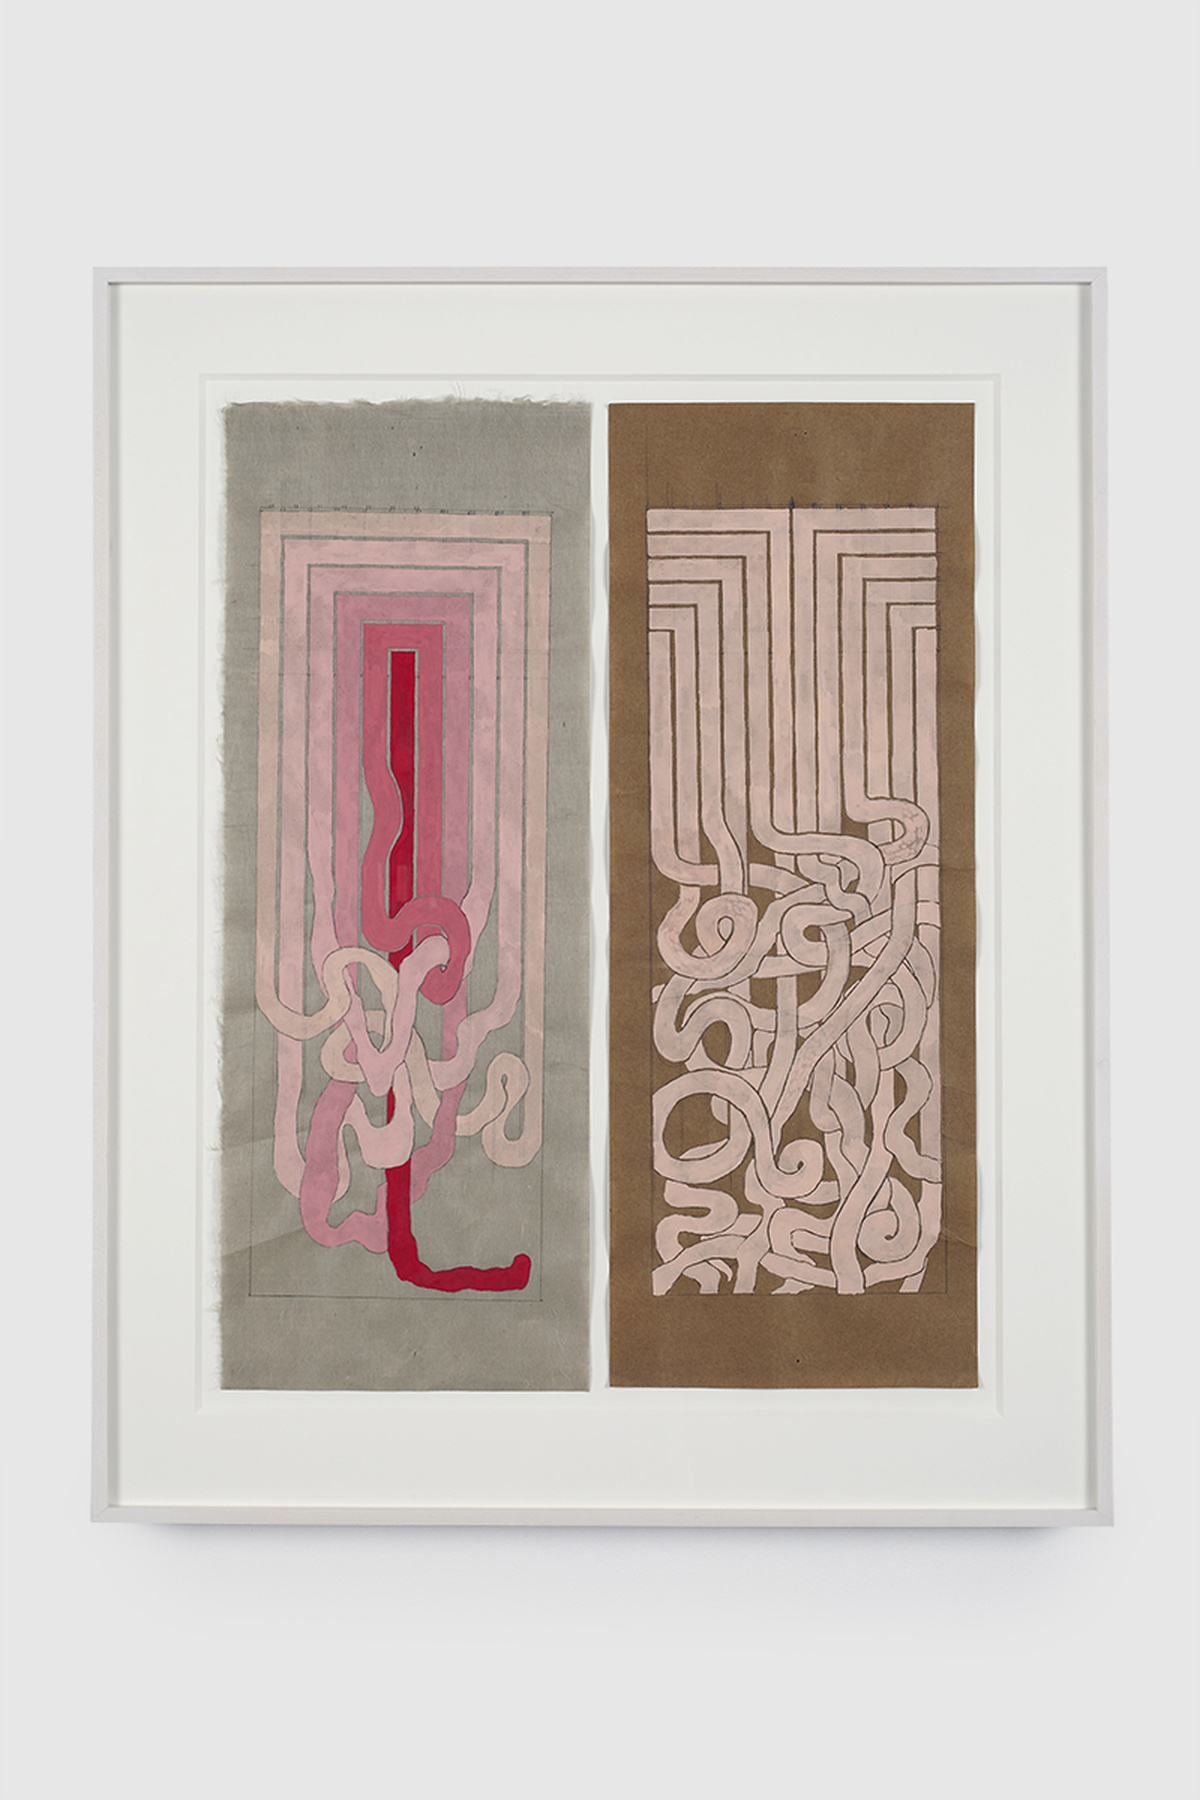 81.Hoeber_Angular to Curved Experiments 1&2, 2015_Gouache and graphite on mulberry paper_Approx 18x7 in each piece